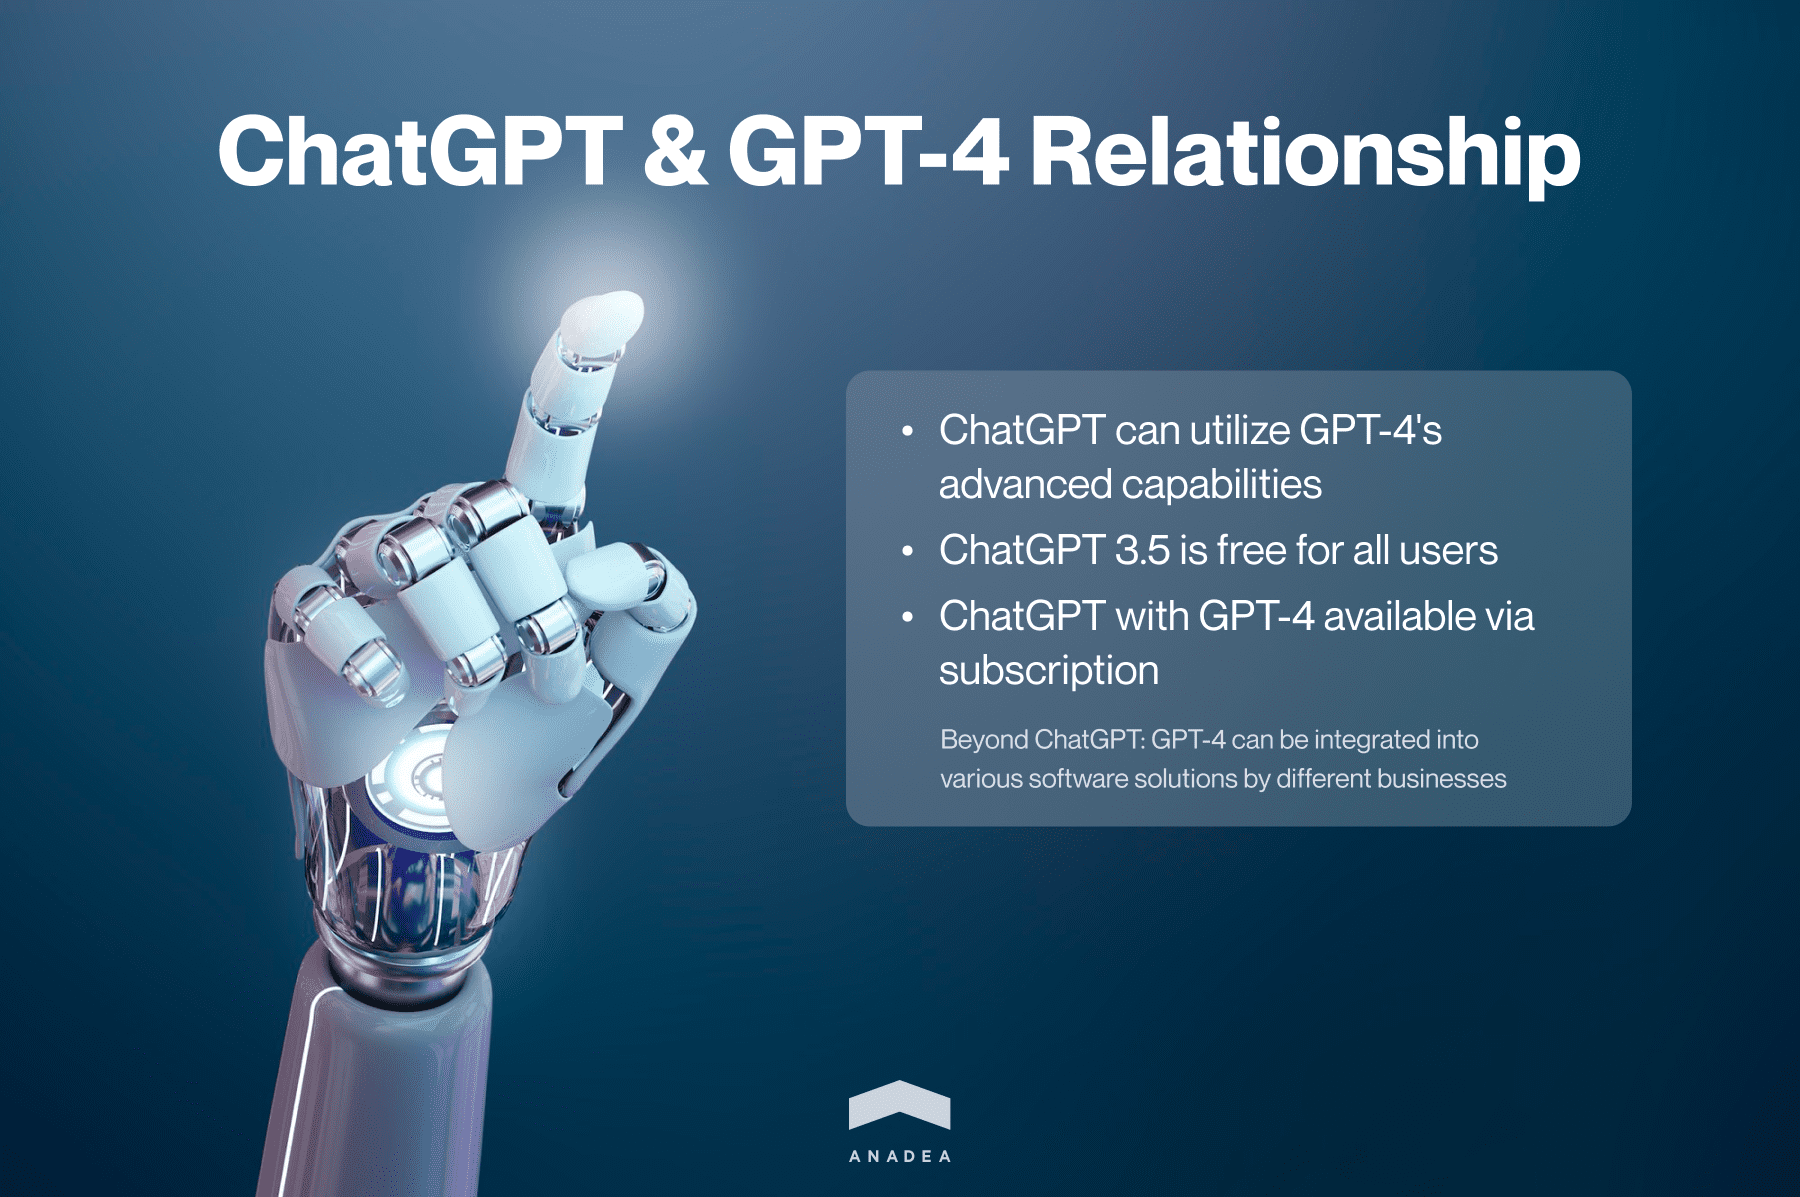 How ChatGPT and GPT-4 are related